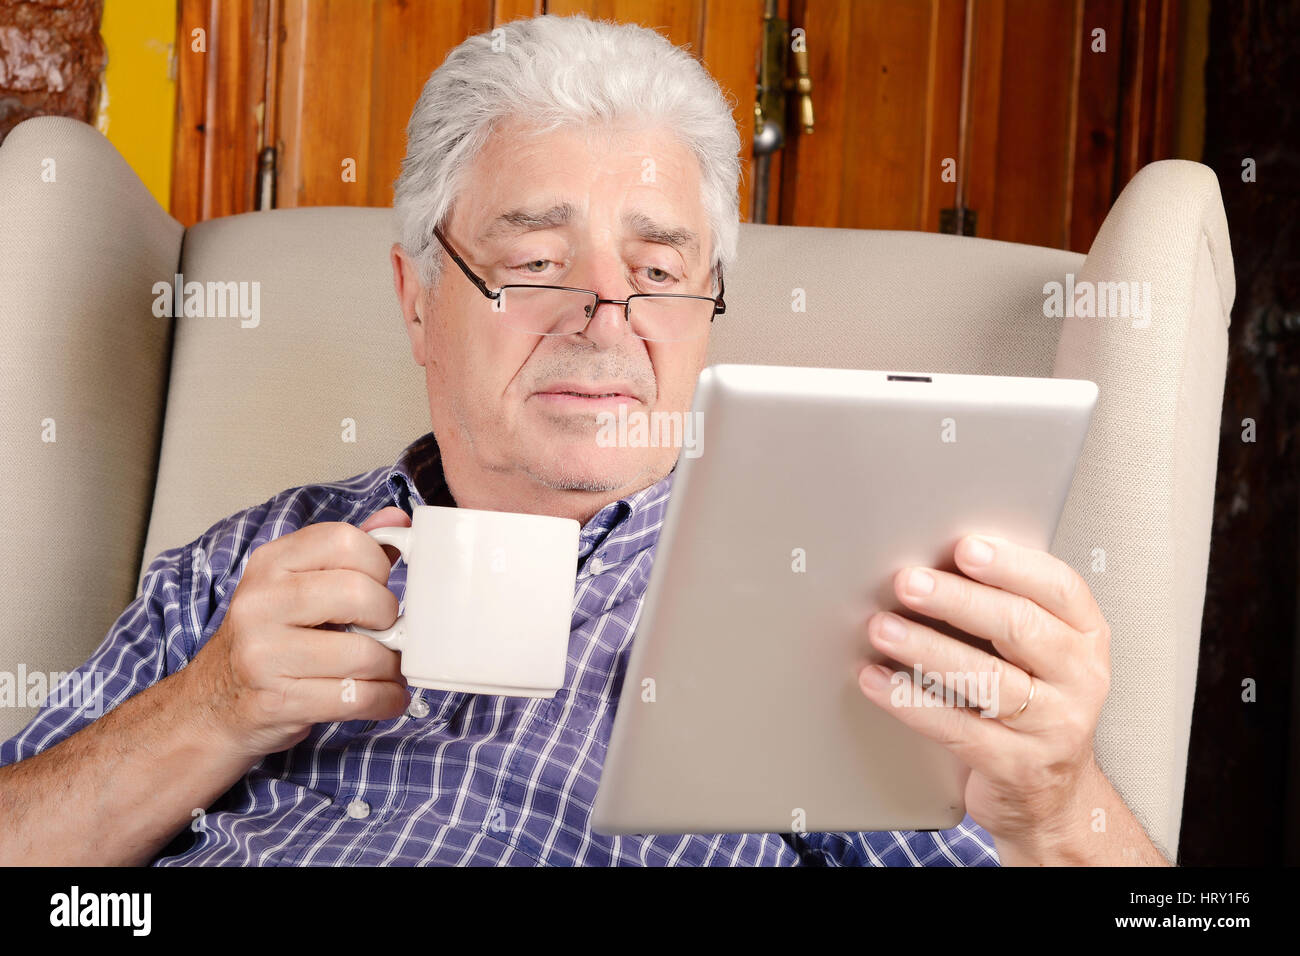 Portrait of an old man having a cup of coffee and using digital tablet. Indoors. Stock Photo